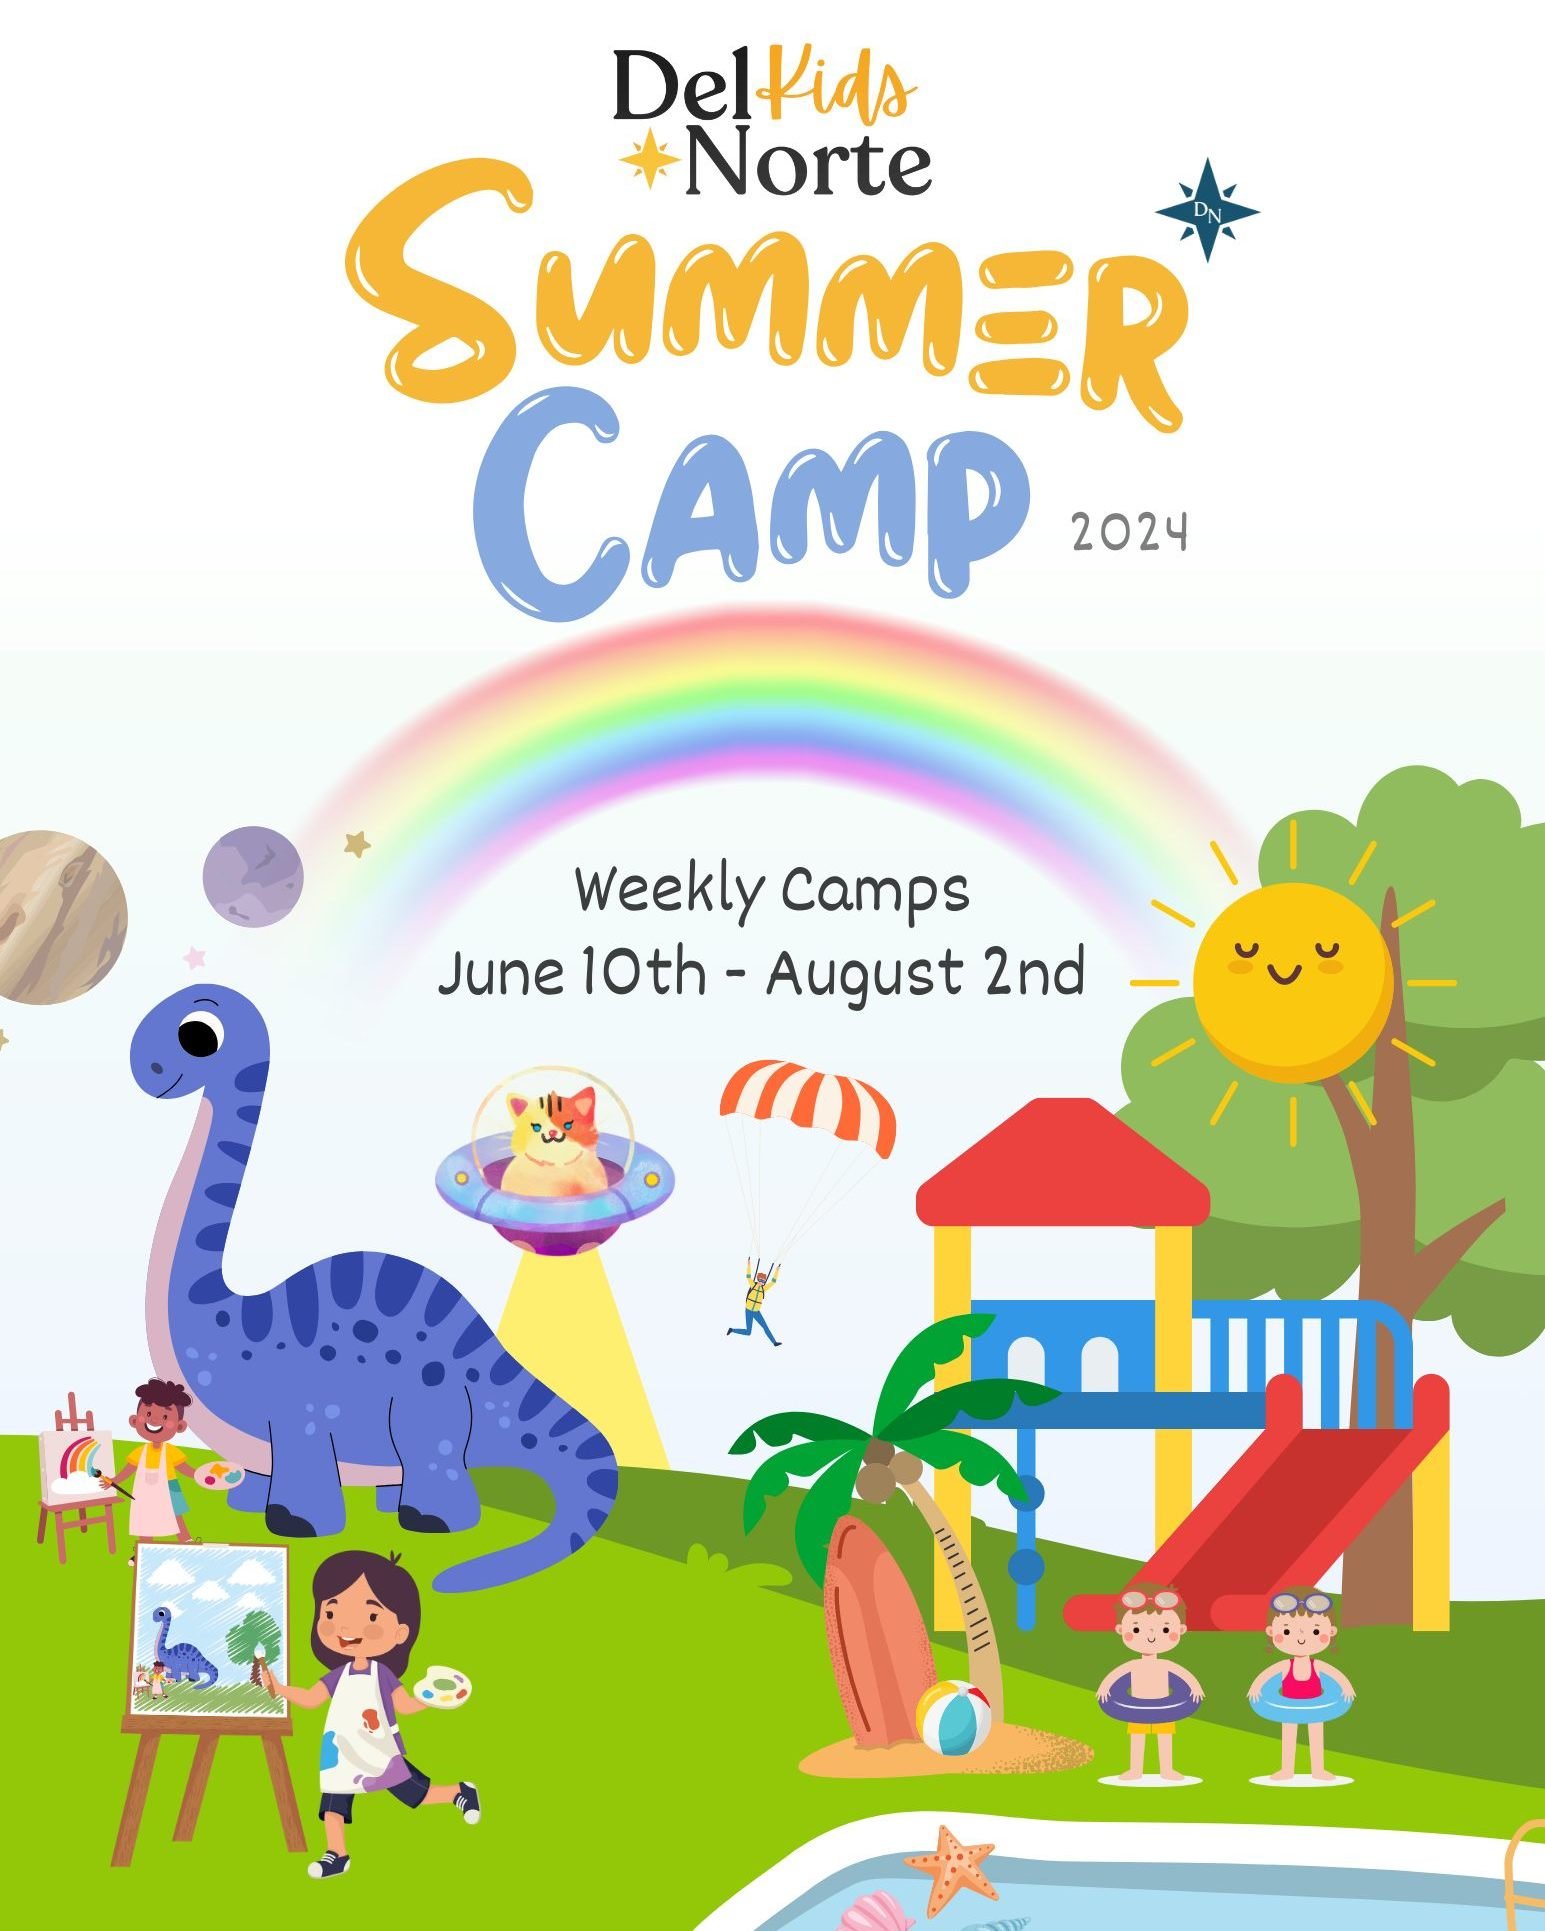 Summer Camp Registration is closing May 11th. Get your registration packets in now. Packets are available at the front desk. Once filled out please drop it at the front desk for our Childcare Director Joleah. Questions? Email - Joleaha@delnorteclub.c